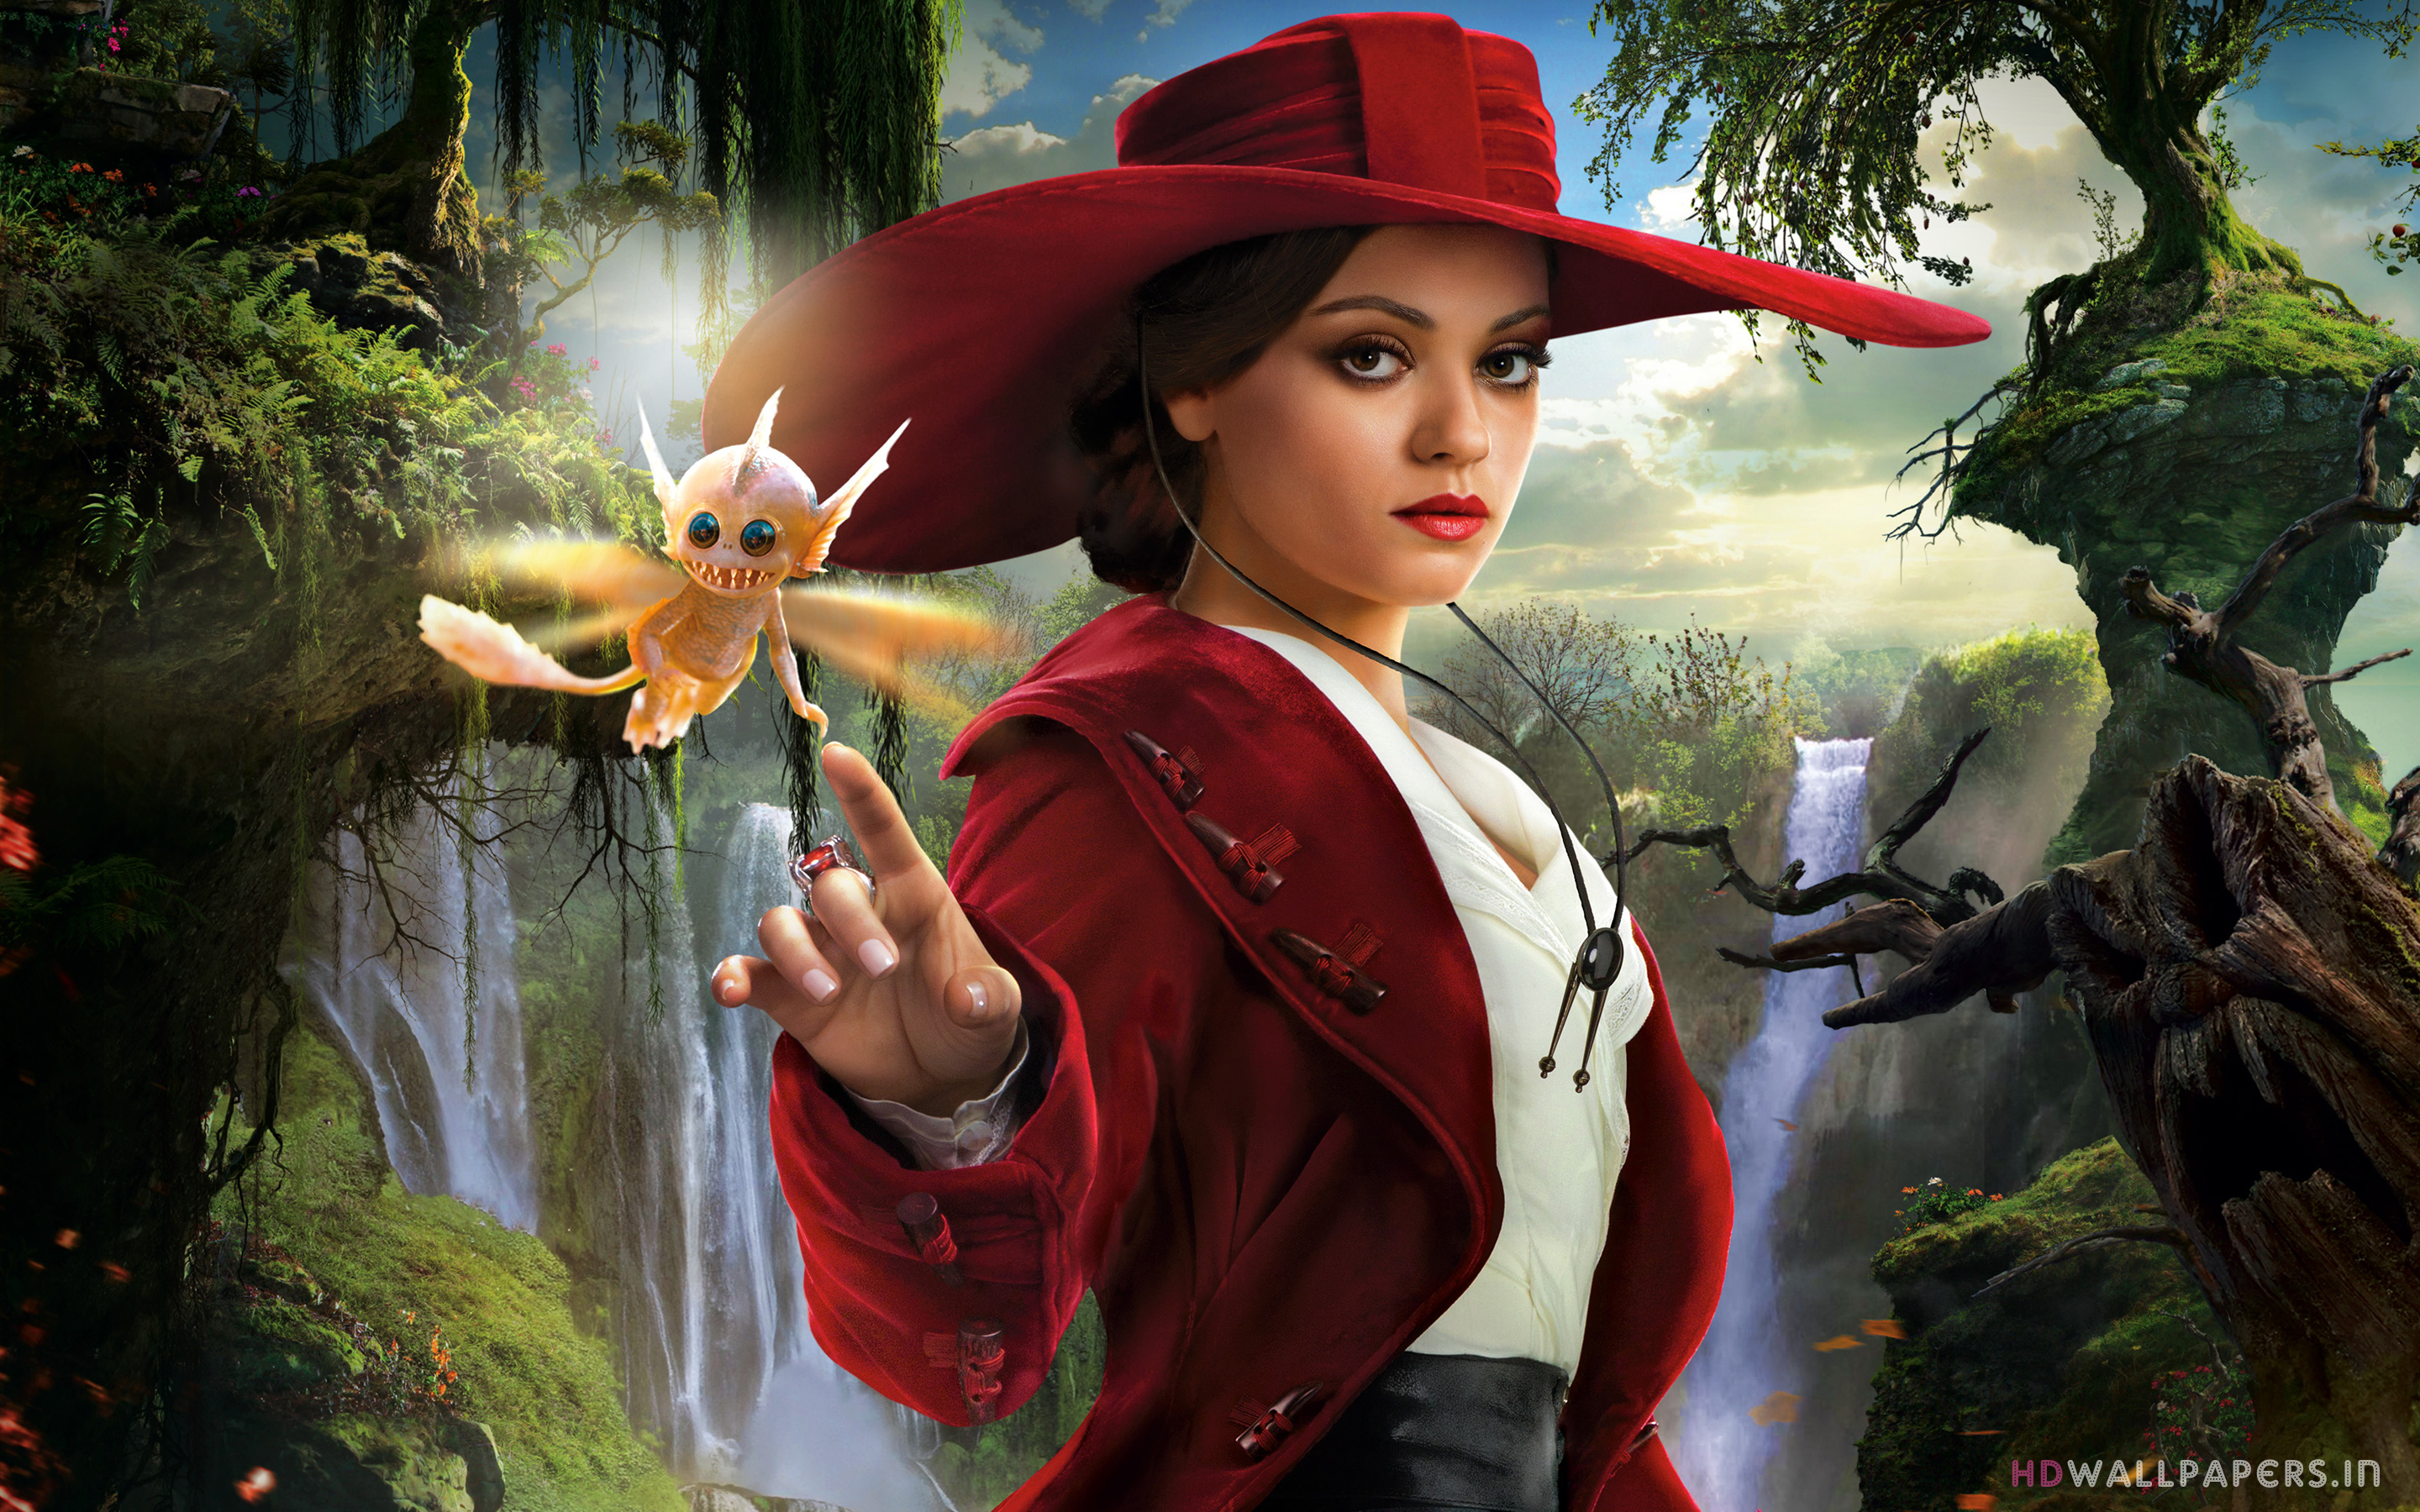 Mila Kunis Oz The Great And Powerful Wallpaper - Mila Kunis Oz The Great And Powerful - HD Wallpaper 